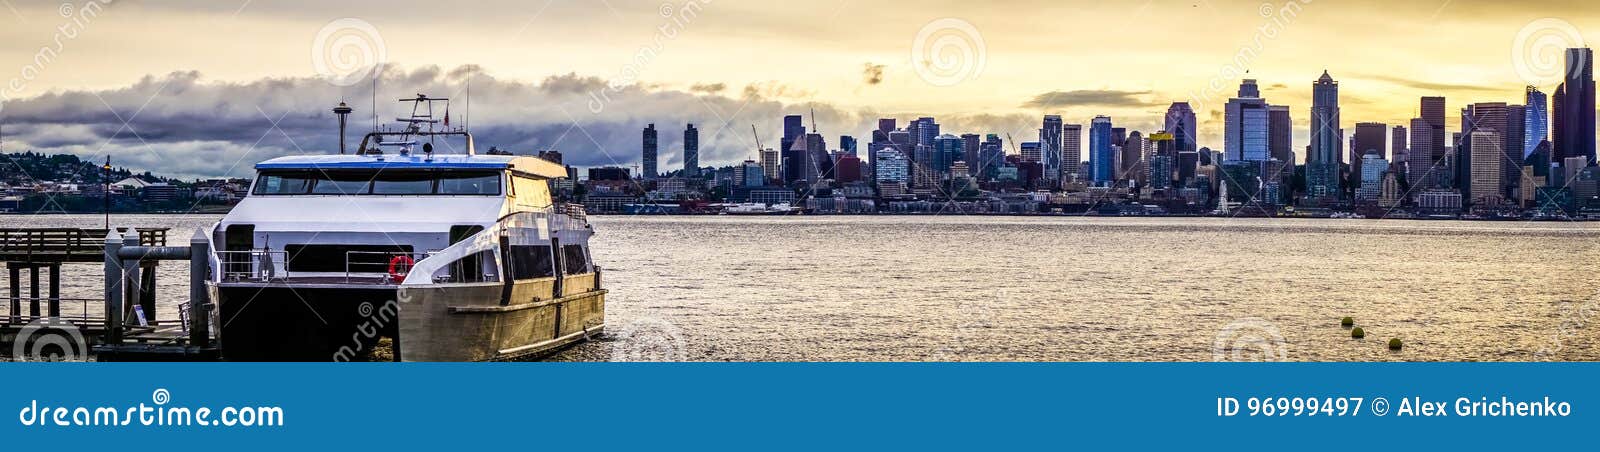 seattle city skyline early morning with watercraft in foreground